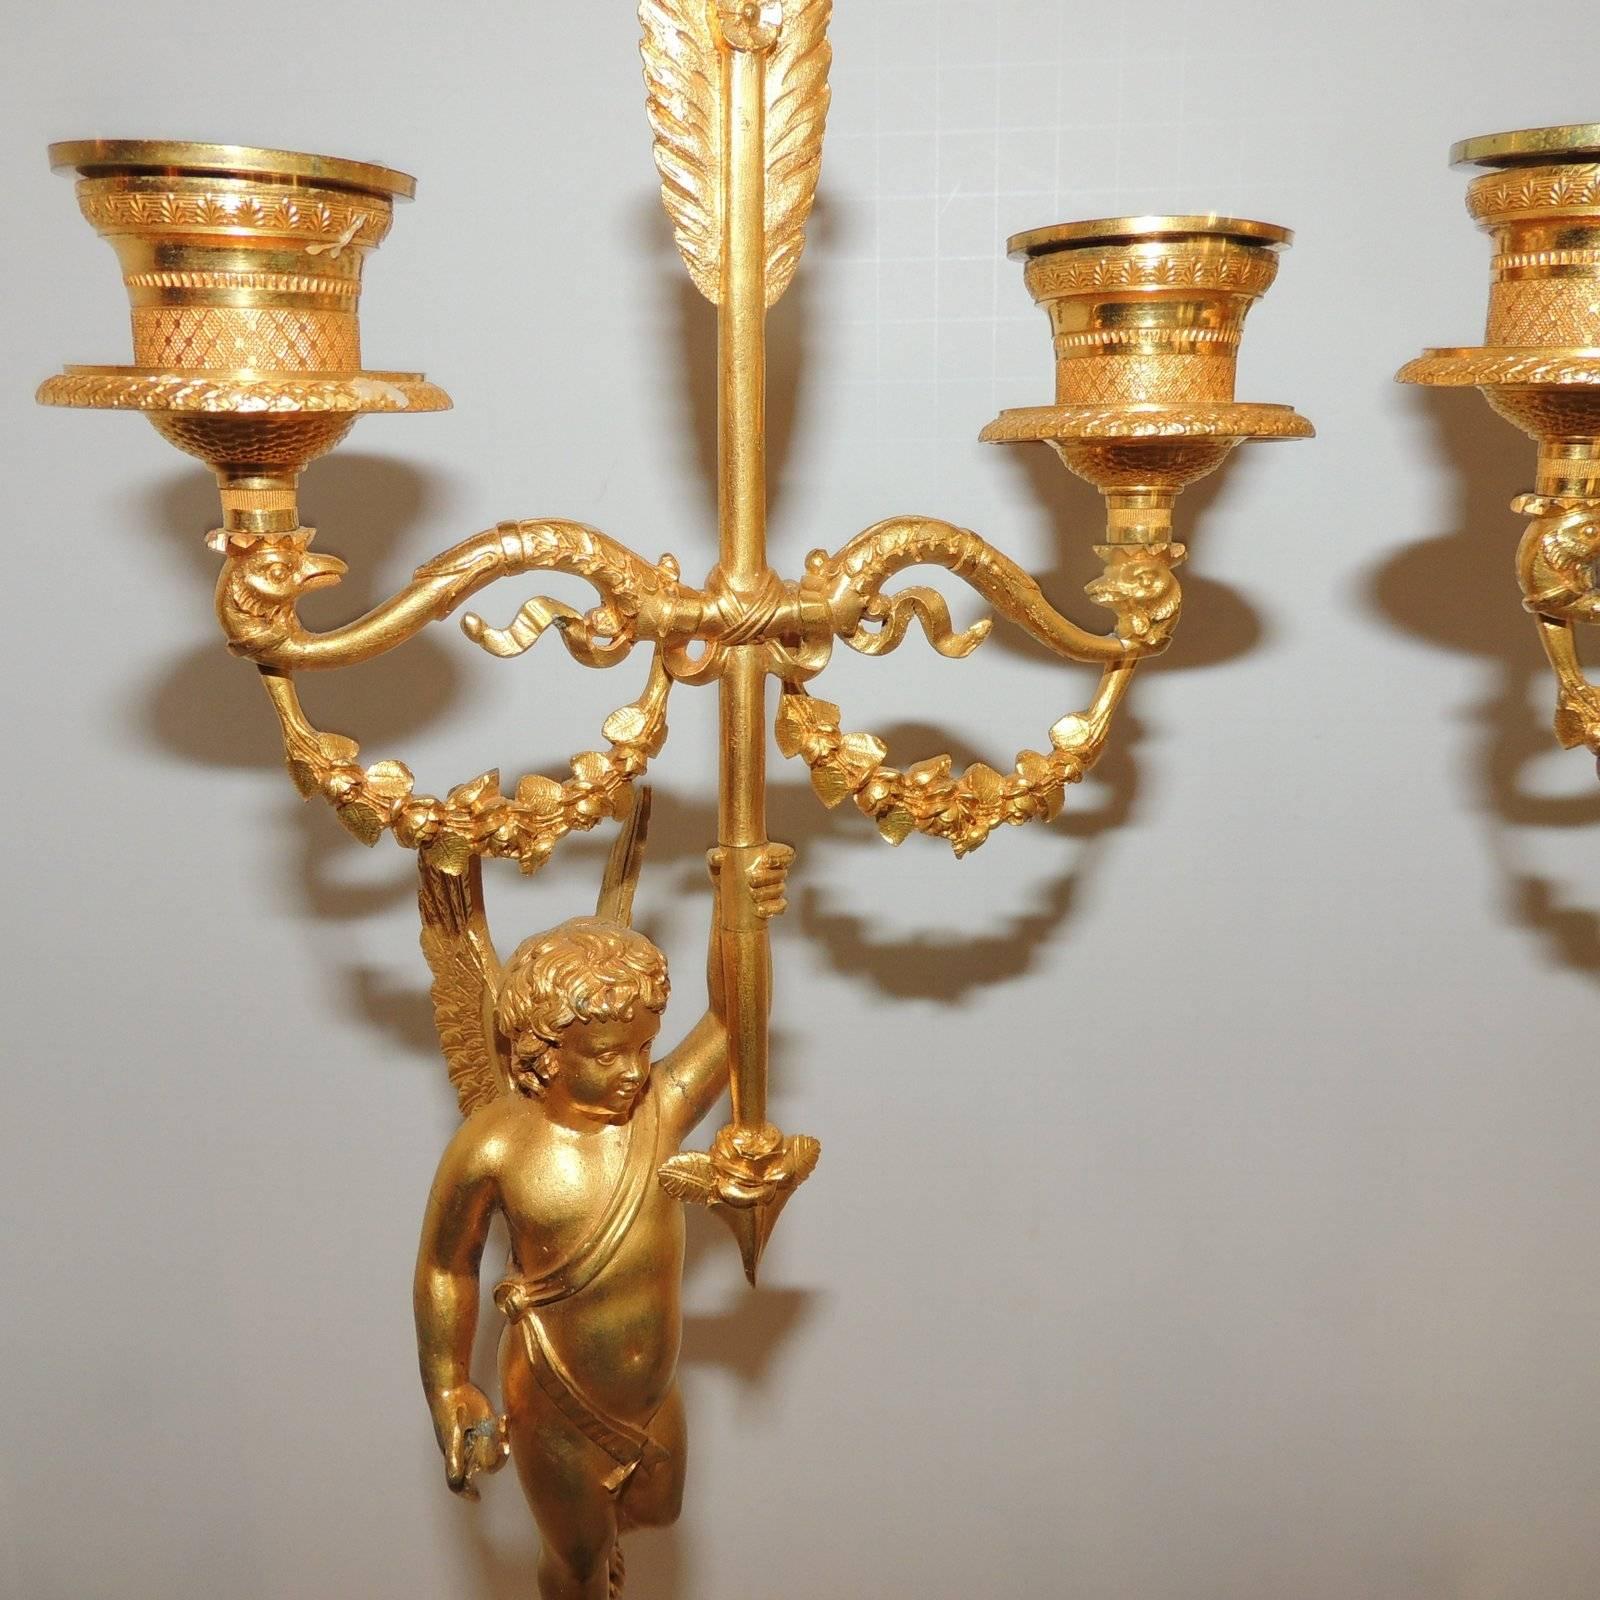 Wonderful Pair Dore Bronze Two-Arm Winged Putti Cherub Neoclassical Candelabras In Good Condition For Sale In Roslyn, NY